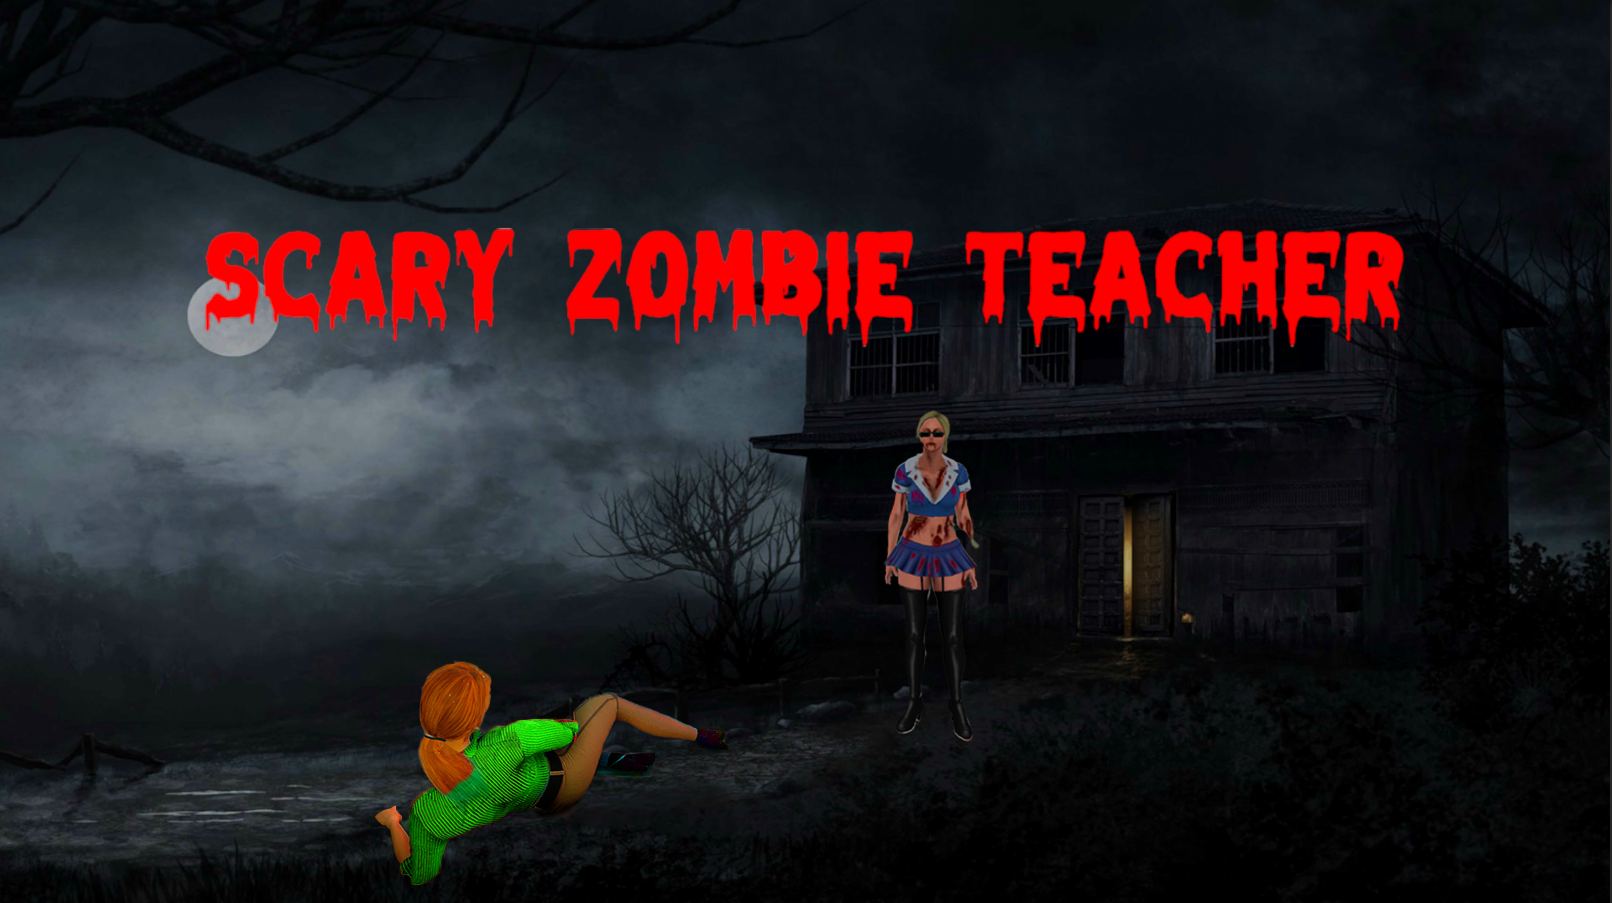 Mod of Scary Teacher for MCPE for Android - Free App Download